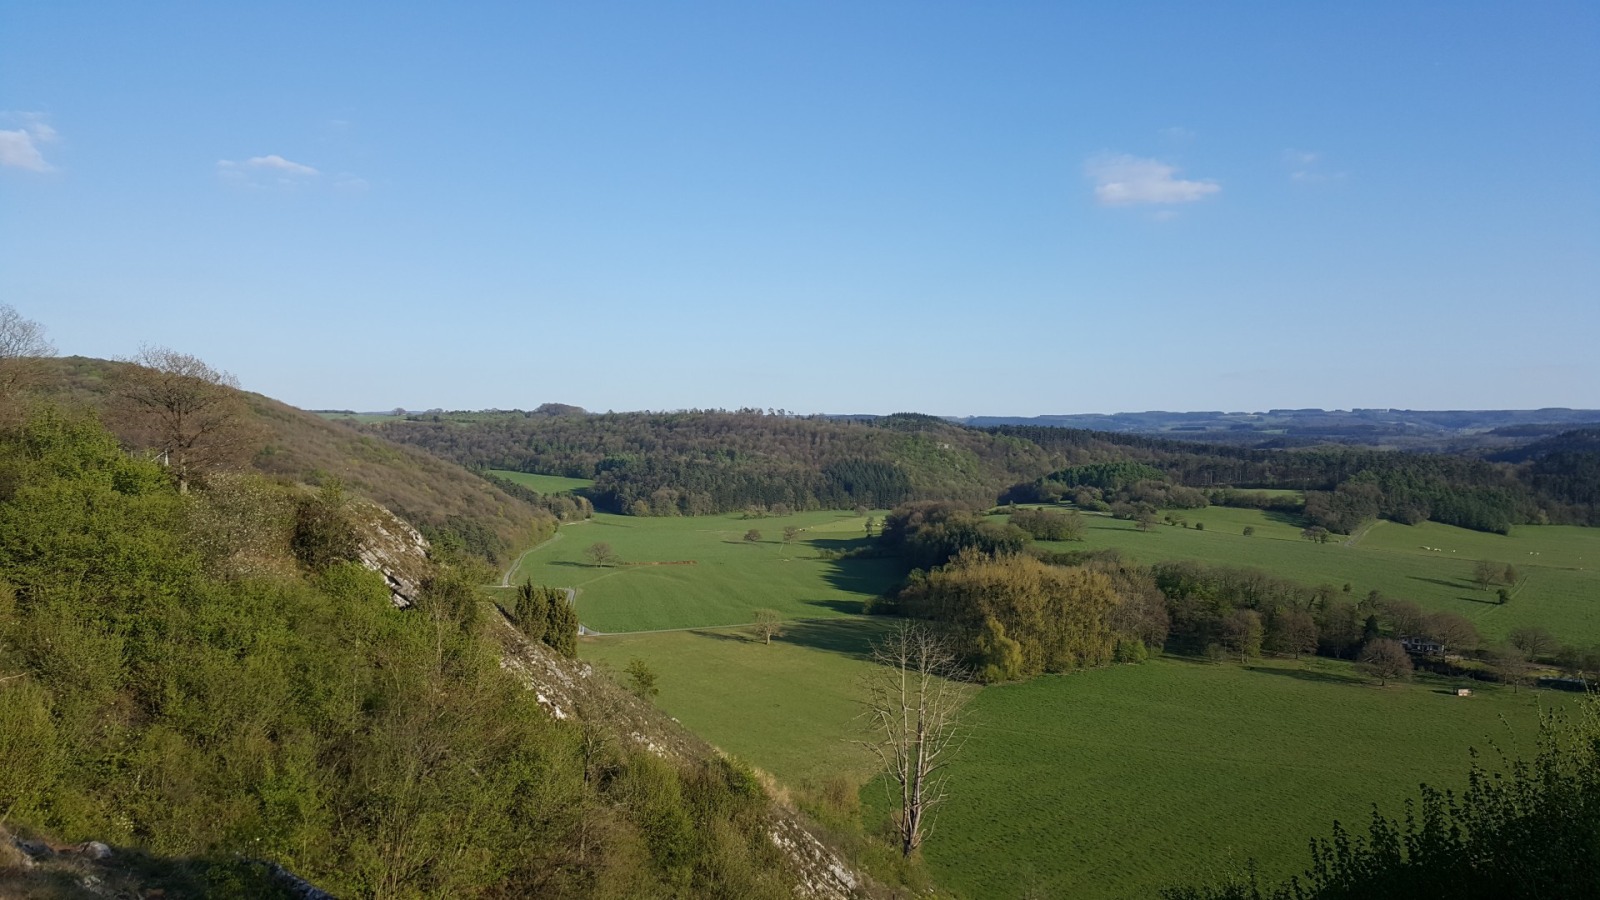 View of the Rochefortoise countryside under a clear sky